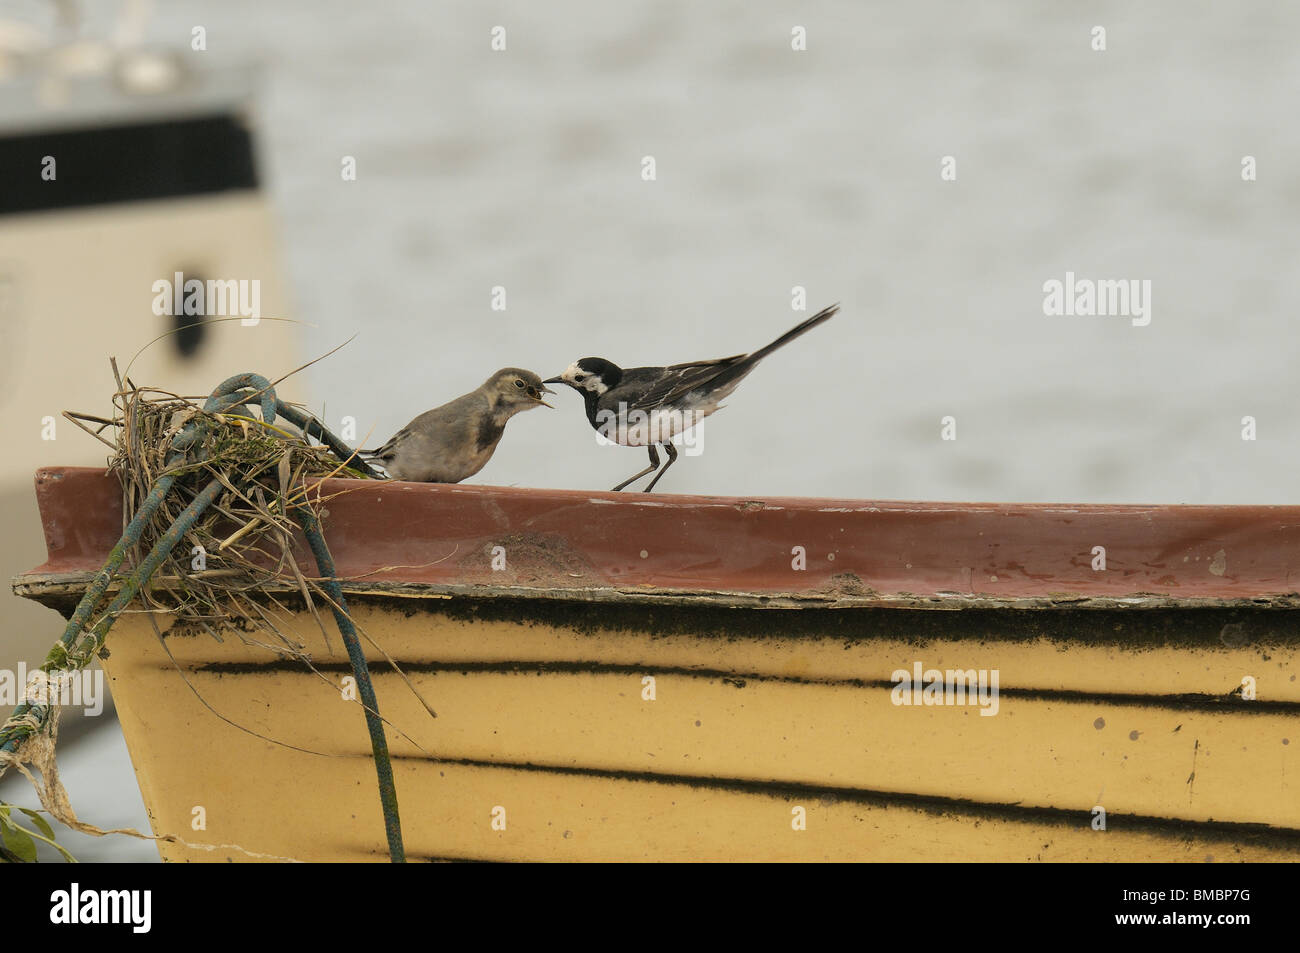 Adult Pied Wagtail feeding young on a boat Stock Photo